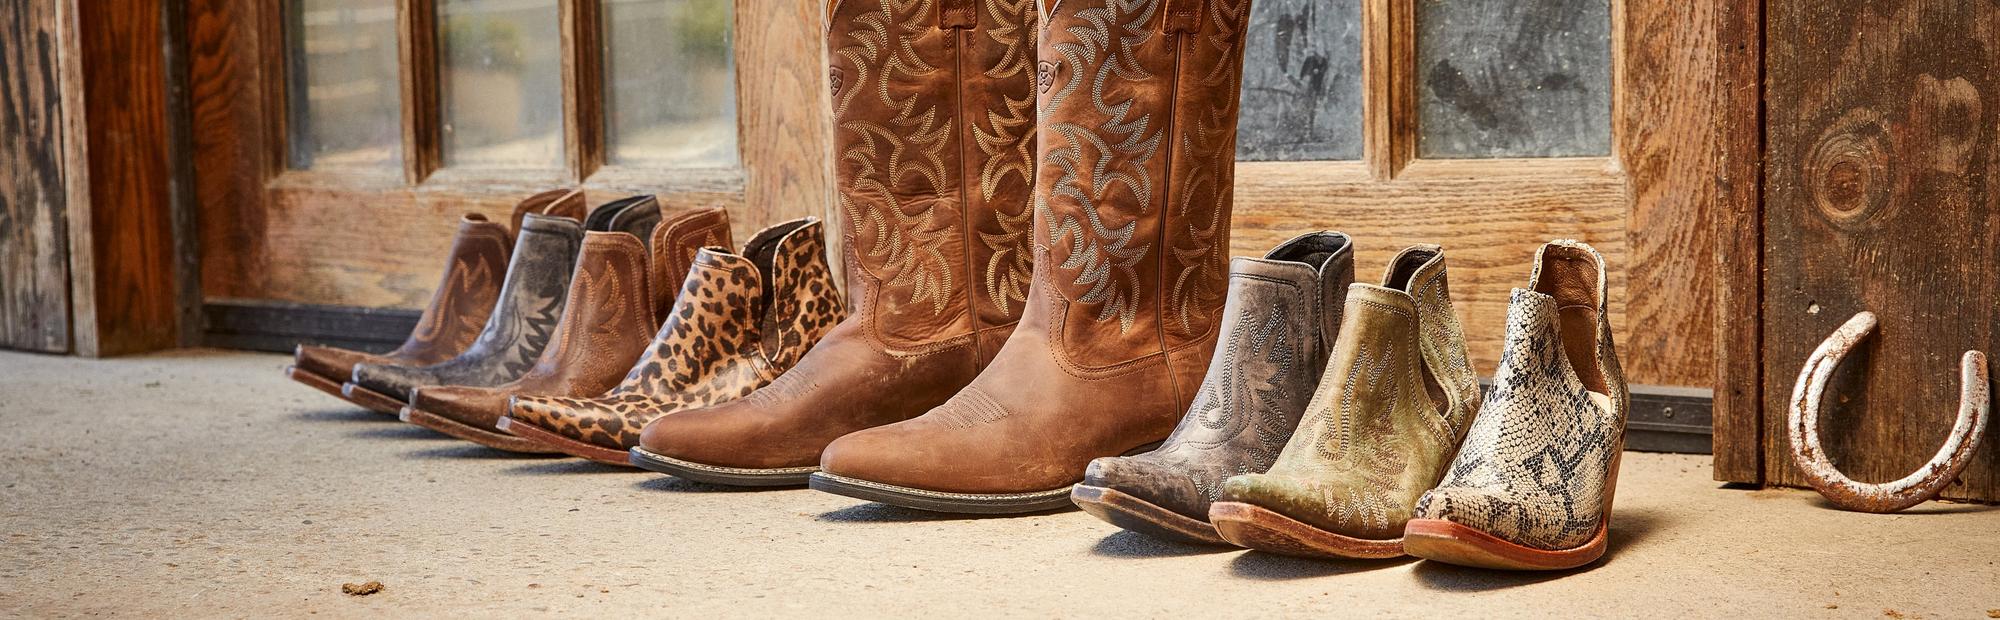 Which Ariat Boot Are You